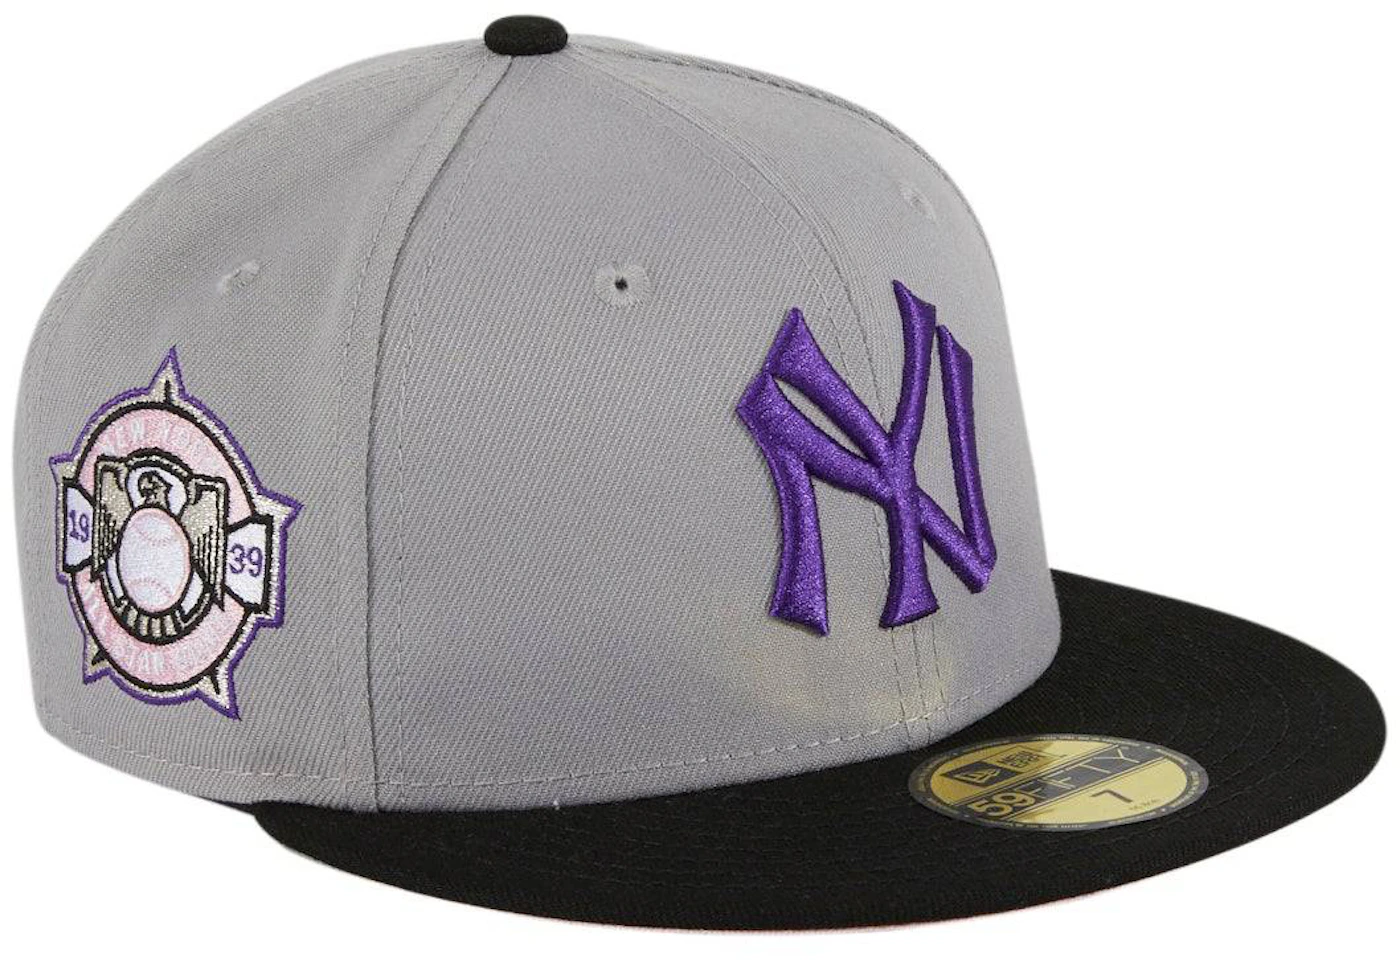 New Era New York Yankees Fuji 1939 All Star Game Patch Hat Club Exclusive 59FIFTY Fitted Hat Grey/Black